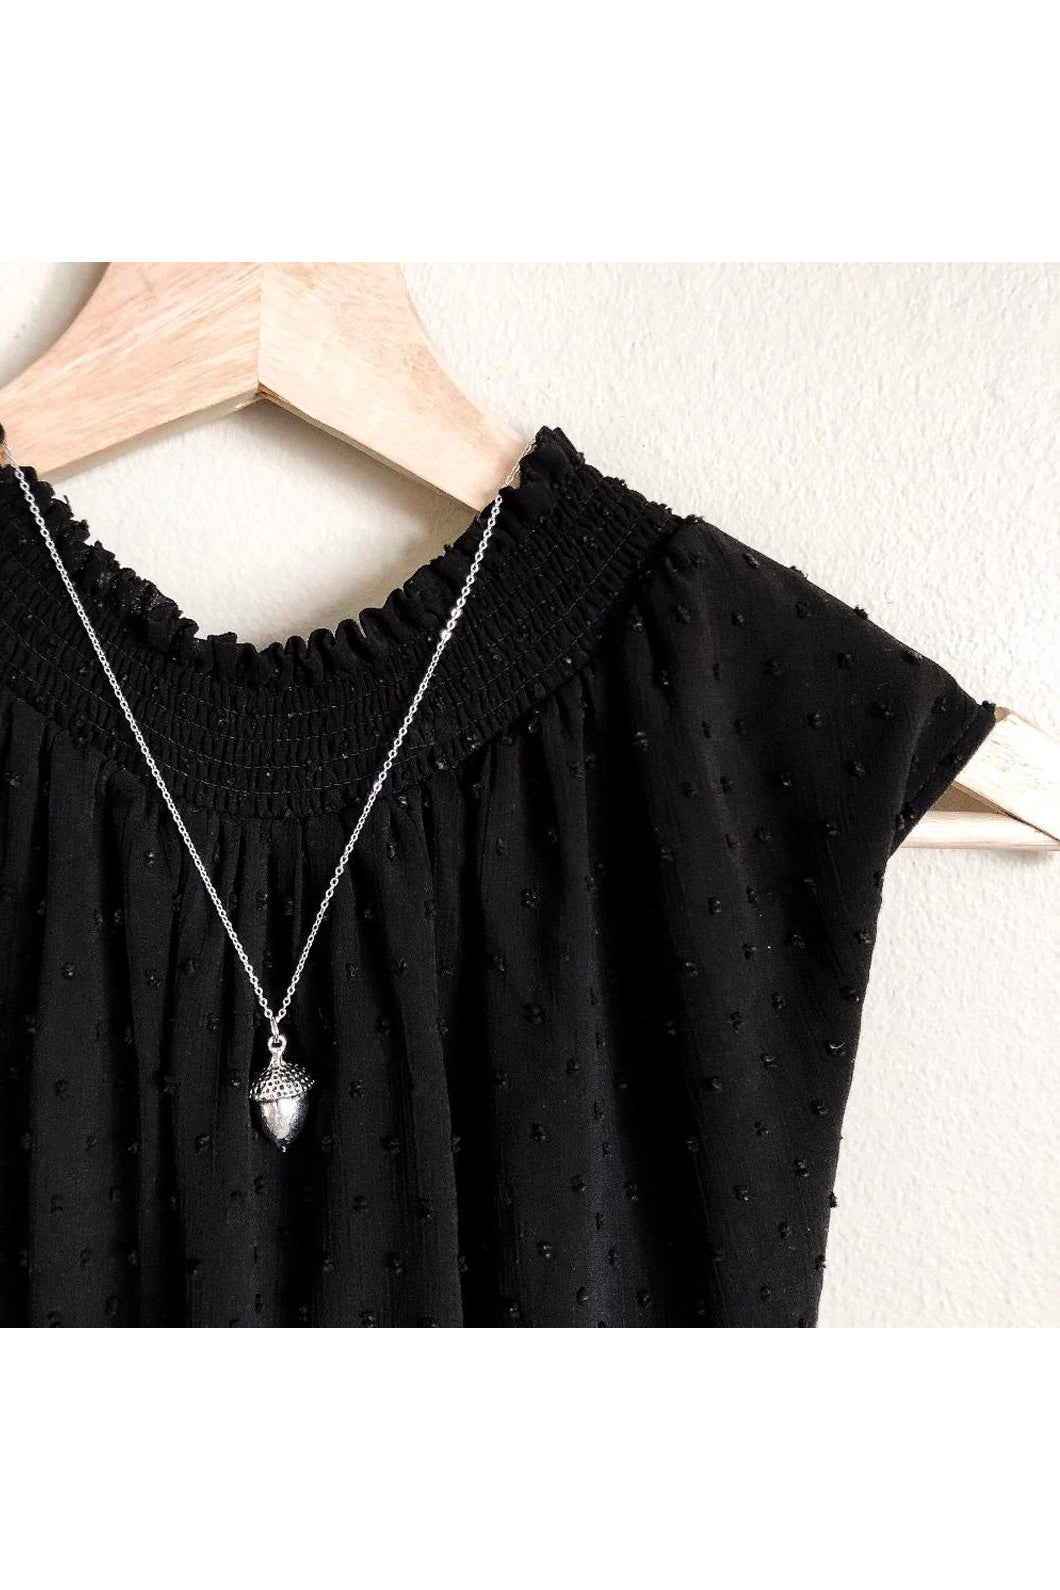 Large acorn necklace by Birch Jewellery; shown in silver; flat lay; styled on a black top on a wooden hanger